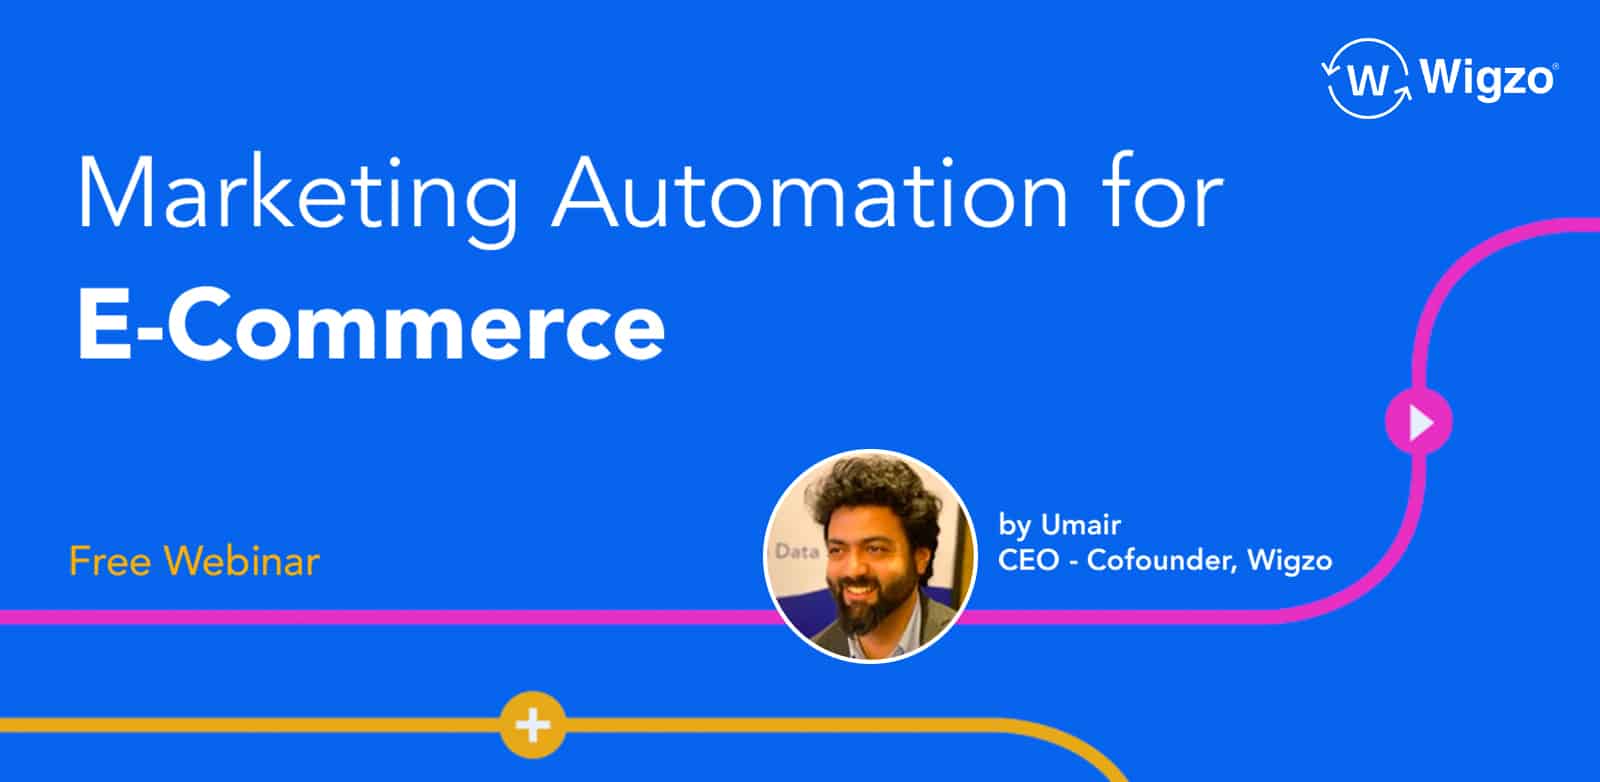 Live Webinar on Marketing Automation for Ecommerce